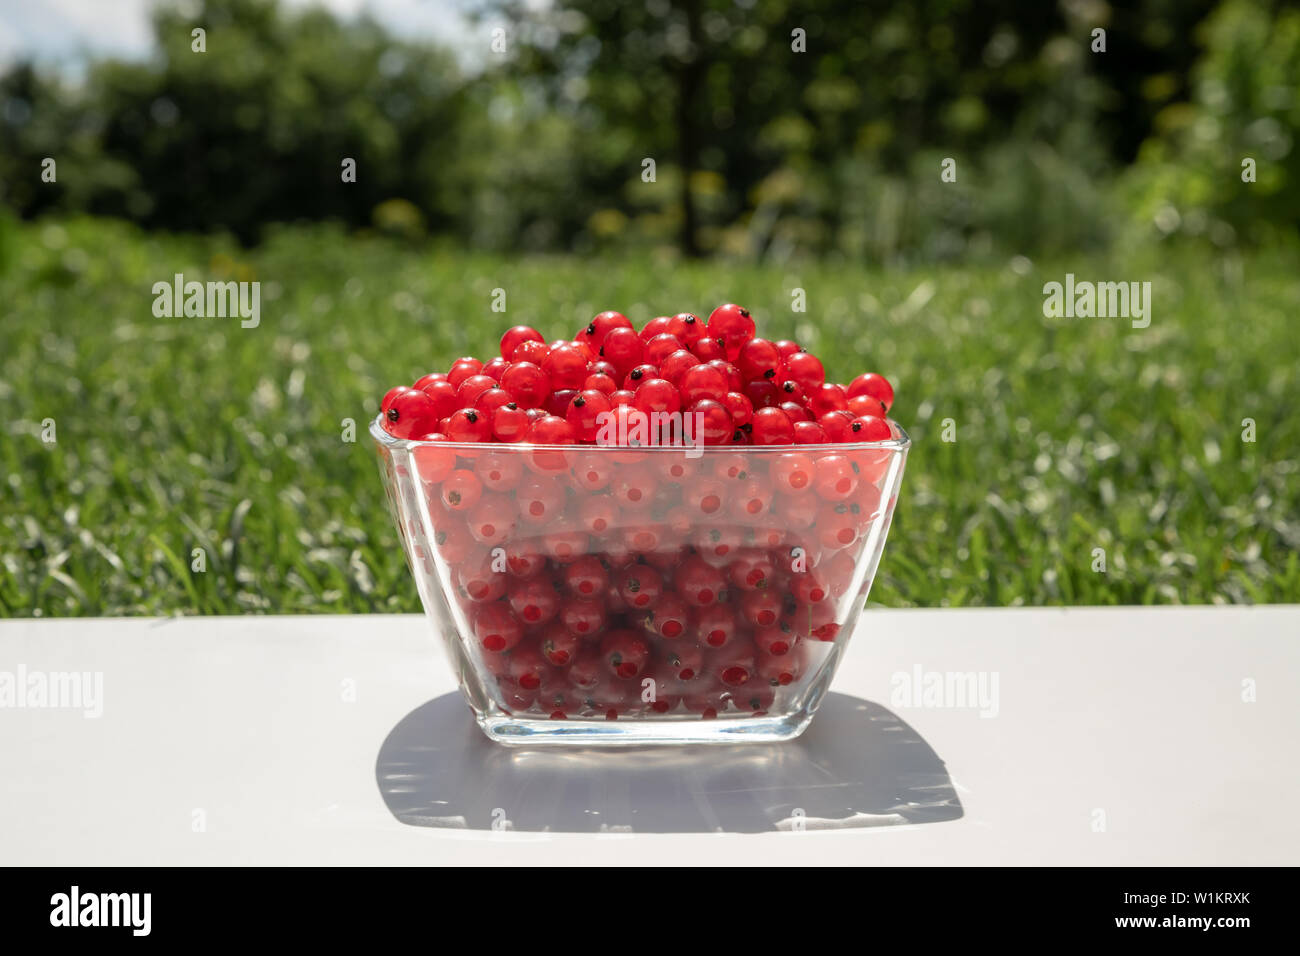 Description: Summer harvest table with red currants in glasses on a white wooden table with grass on the background Stock Photo